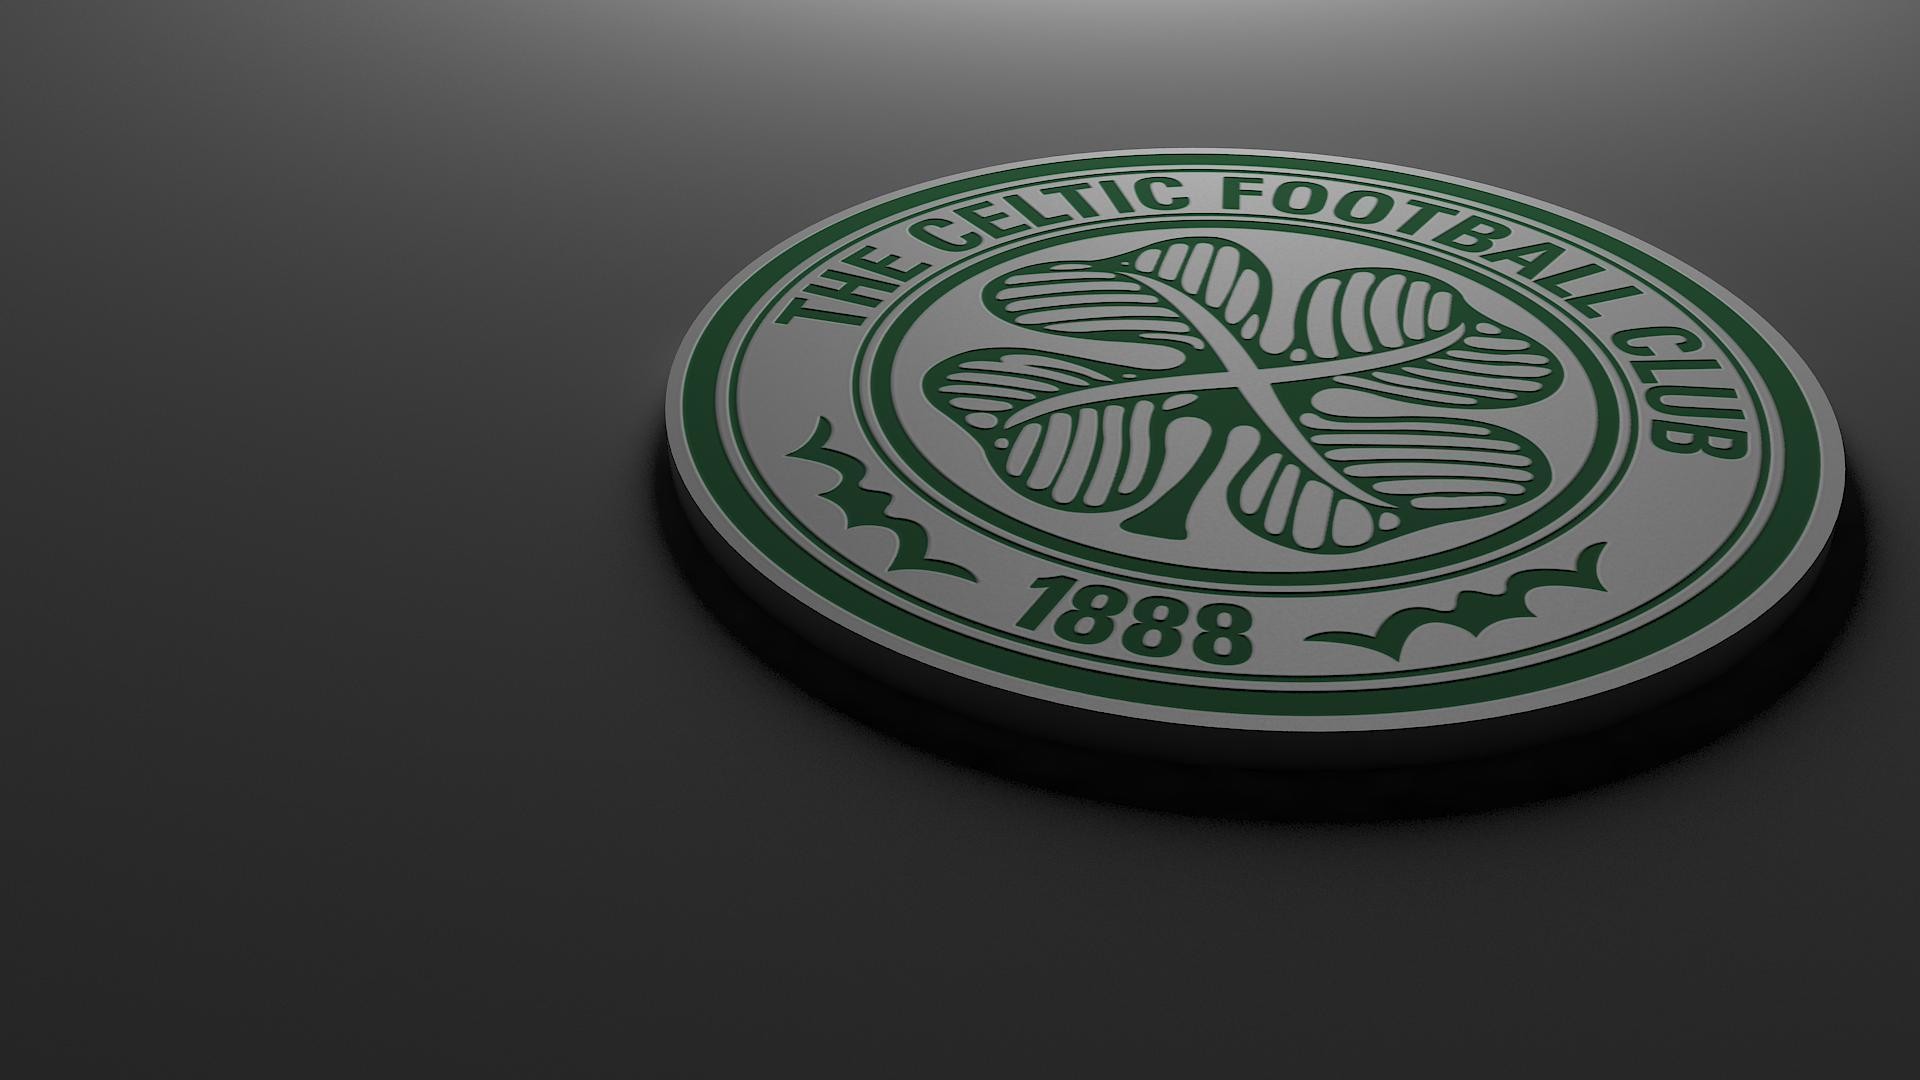 1920x1080 Celtic Football Wallpapers